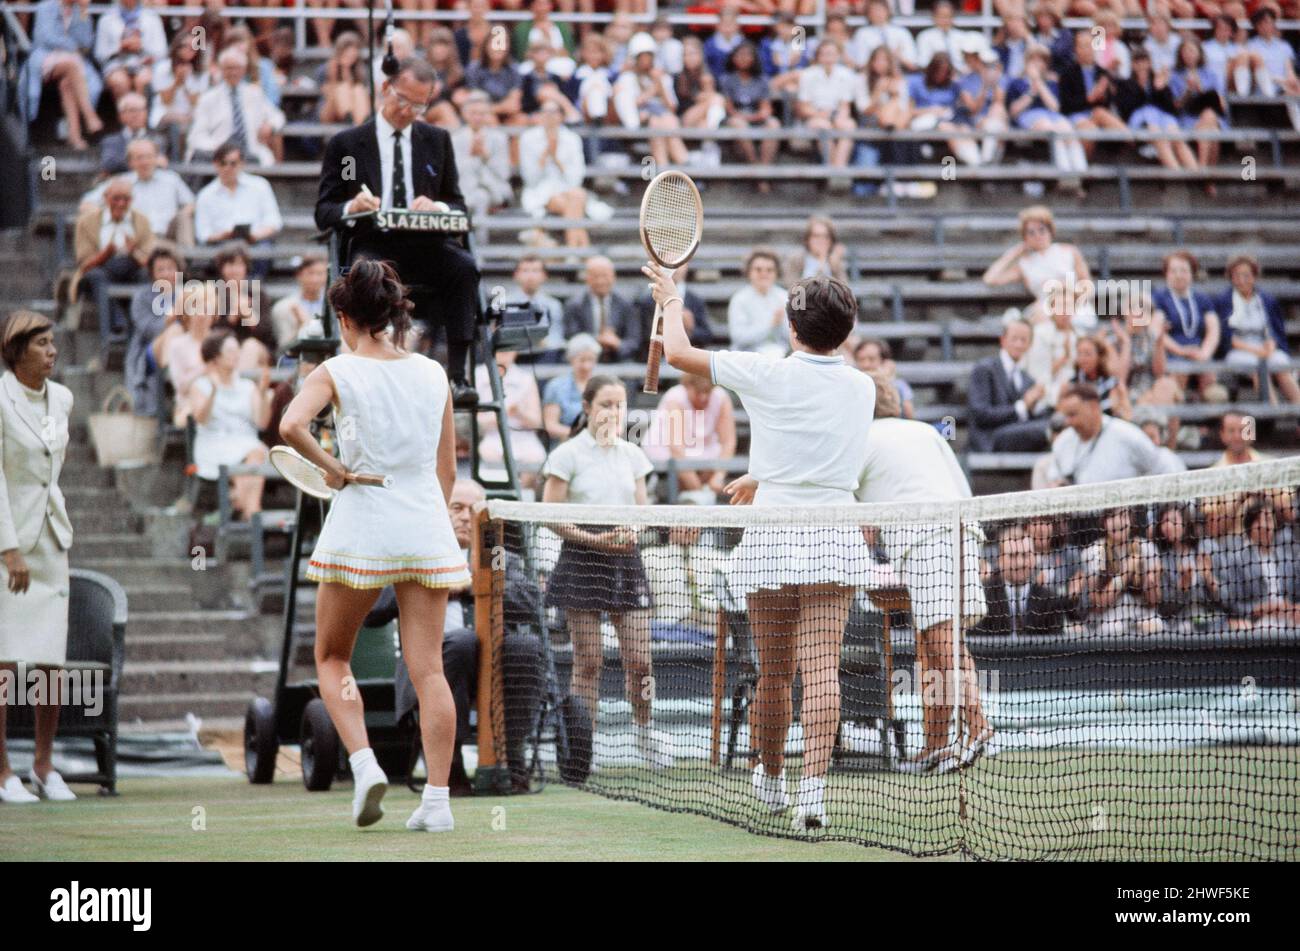 The 1970 Wightman Cup was the 42nd edition of the annual women's team tennis competition between the United States and Great Britain. It was held at the All England Lawn Tennis and Croquet Club in London in England in the United Kingdom.The United States of America beat Great Britain 4-3. (Picture) Billie Jean King (right) after her win. Circa June 1970 Stock Photo